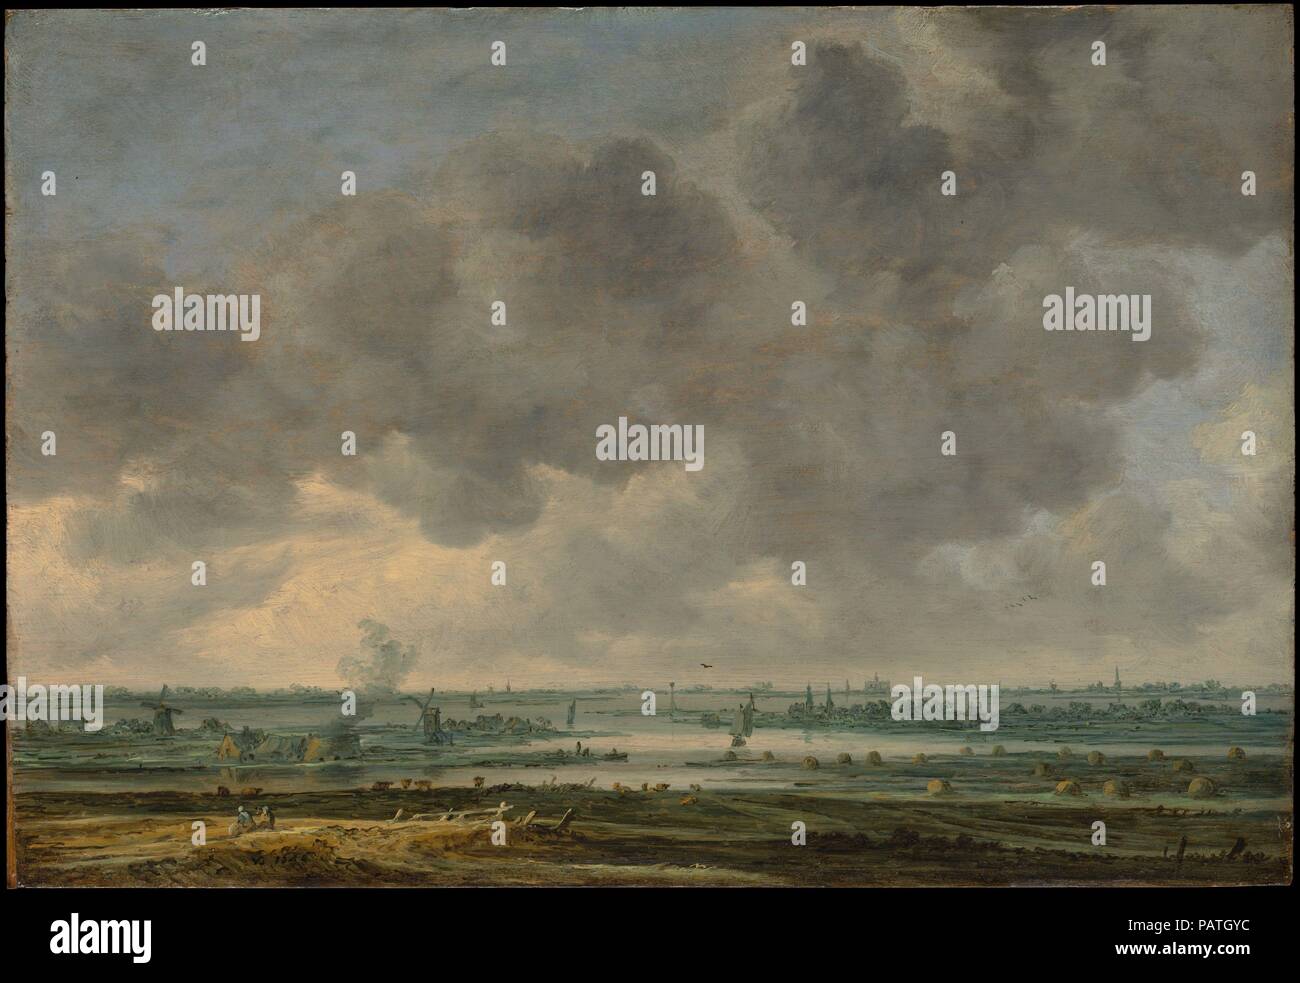 View of Haarlem and the Haarlemmer Meer. Artist: Jan van Goyen (Dutch, Leiden 1596-1656 The Hague). Dimensions: 13 5/8 x 19 7/8 in. (34.6 x 50.5 cm). Date: 1646.  Van Goyen recorded this small but extraordinary panoramic view from the belltower of the church of St. Bavo in Haarlem, but he arbitrarily placed the same building on the horizon like a signpost suggesting the general locale. Beyond the imaginary foregound, the river Spaarne meanders toward the Haarlemmer Meer (Haarlem Lake), an inland body of fresh water that was filled in during the nineteenth century. Museum: Metropolitan Museum o Stock Photo